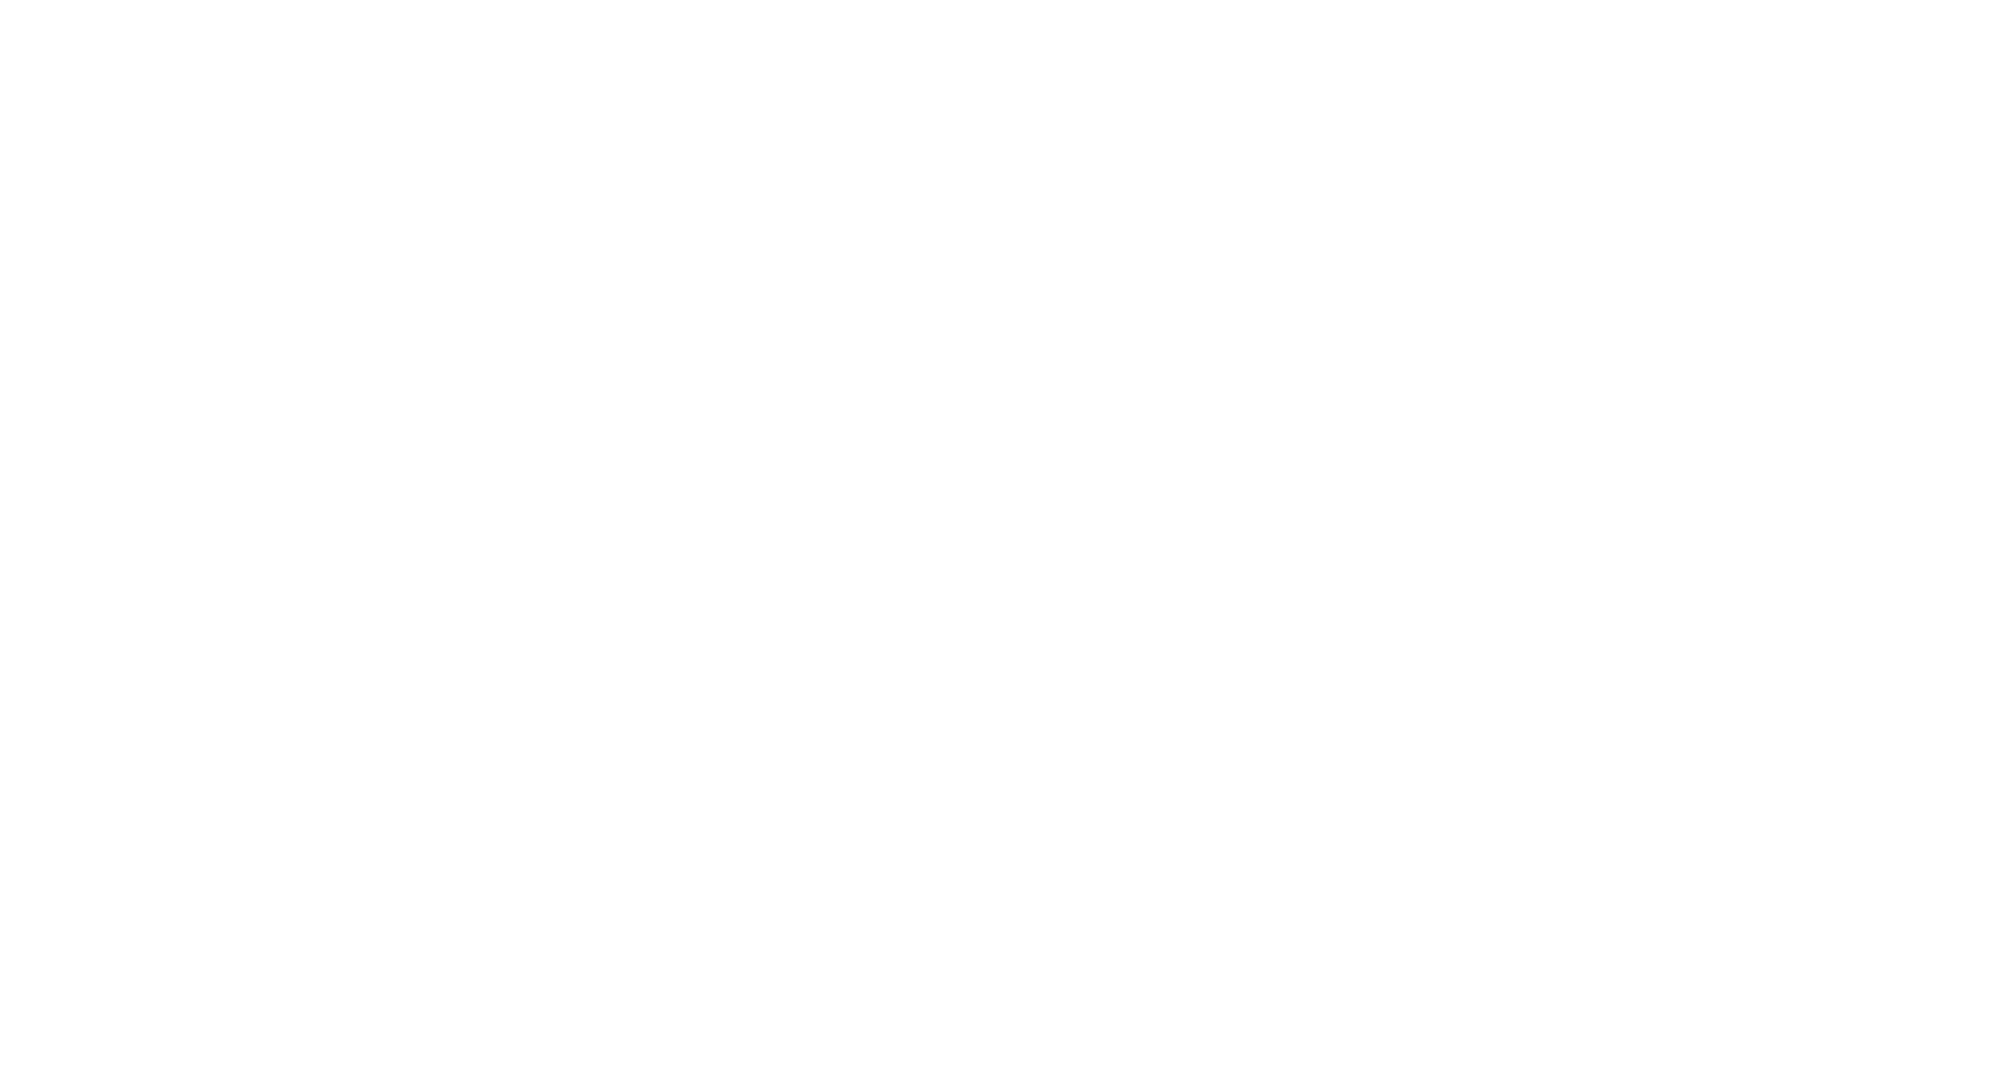 I See T